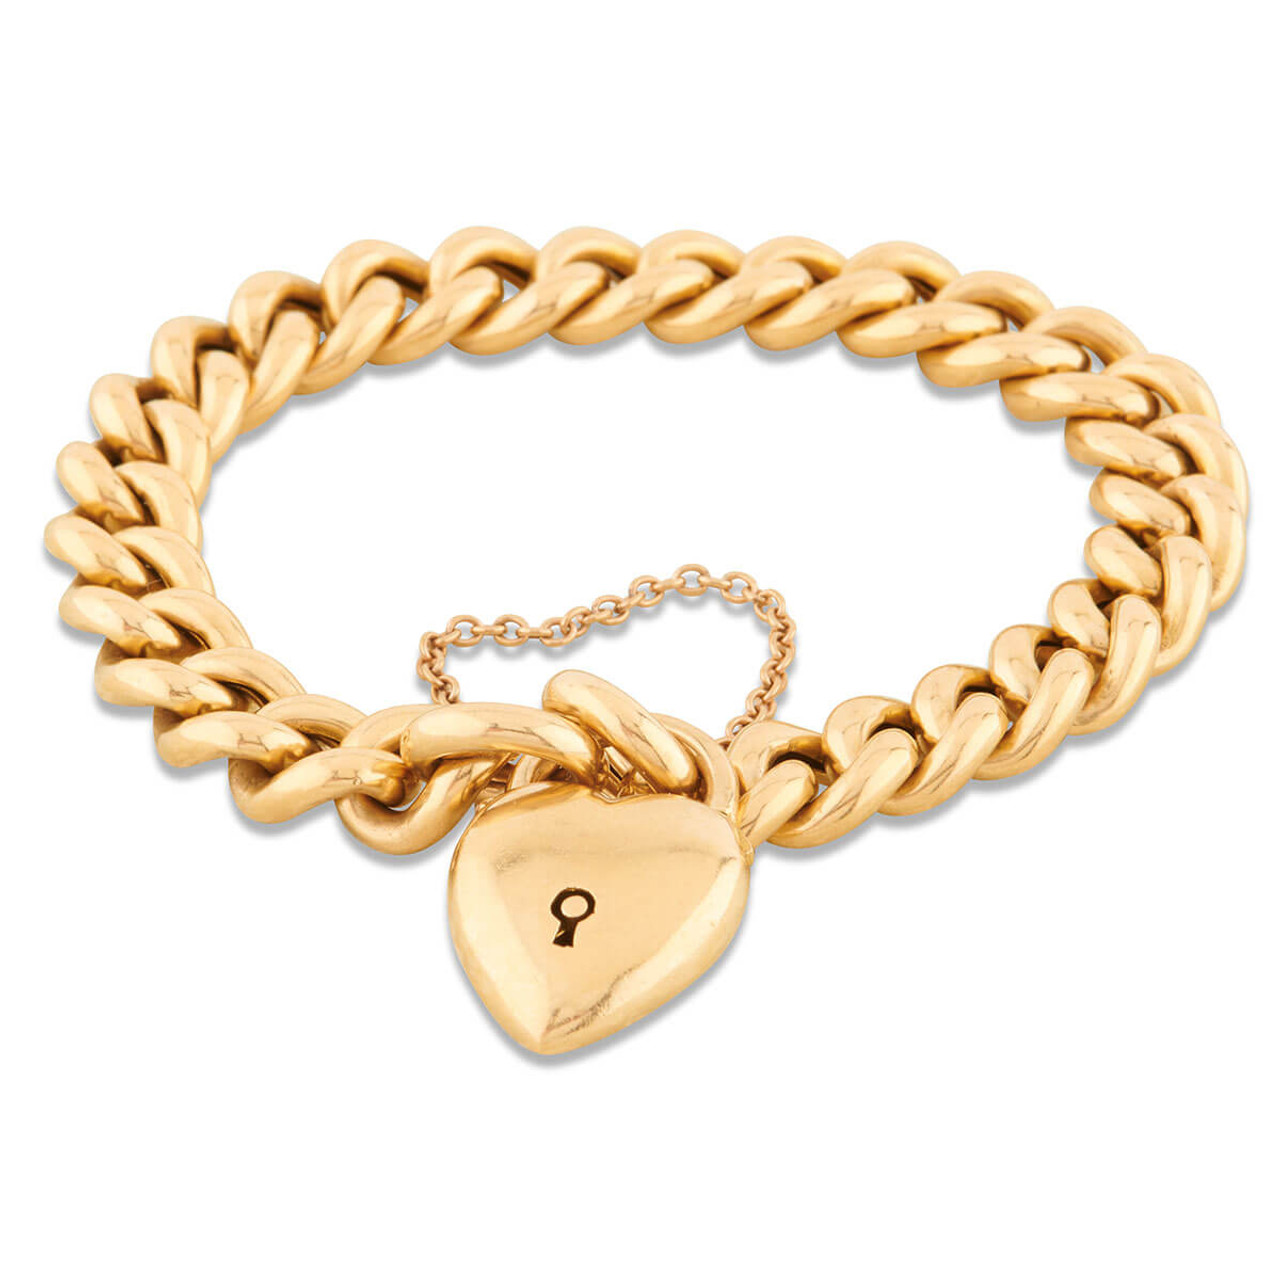 18ct Yellow Gold Heart Shaped Charm Round Open Linked Bracelet